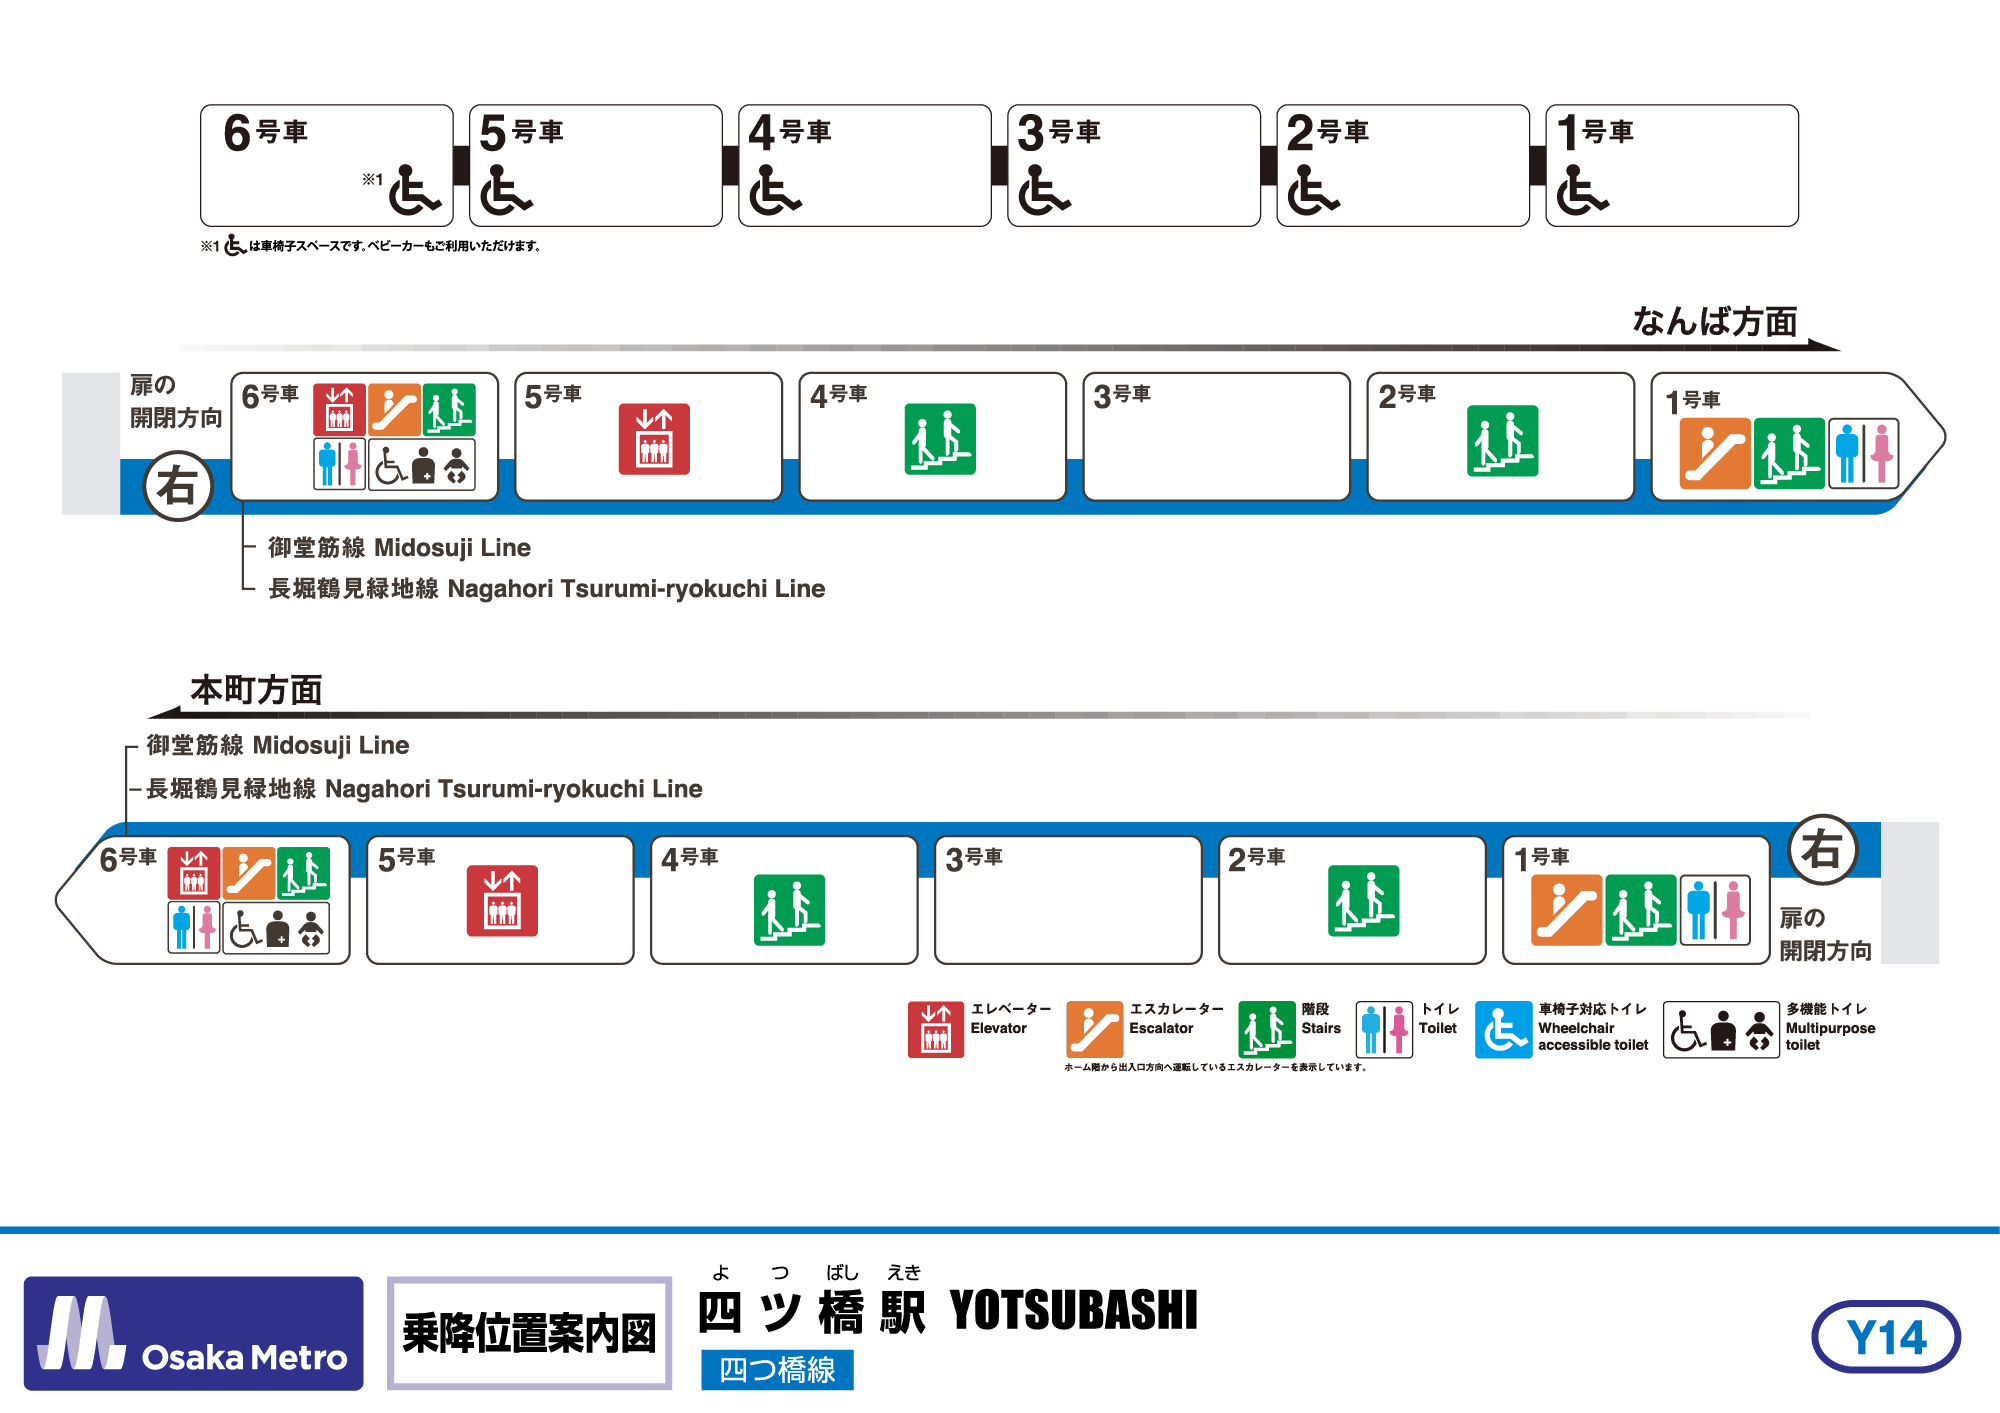 Boarding position map